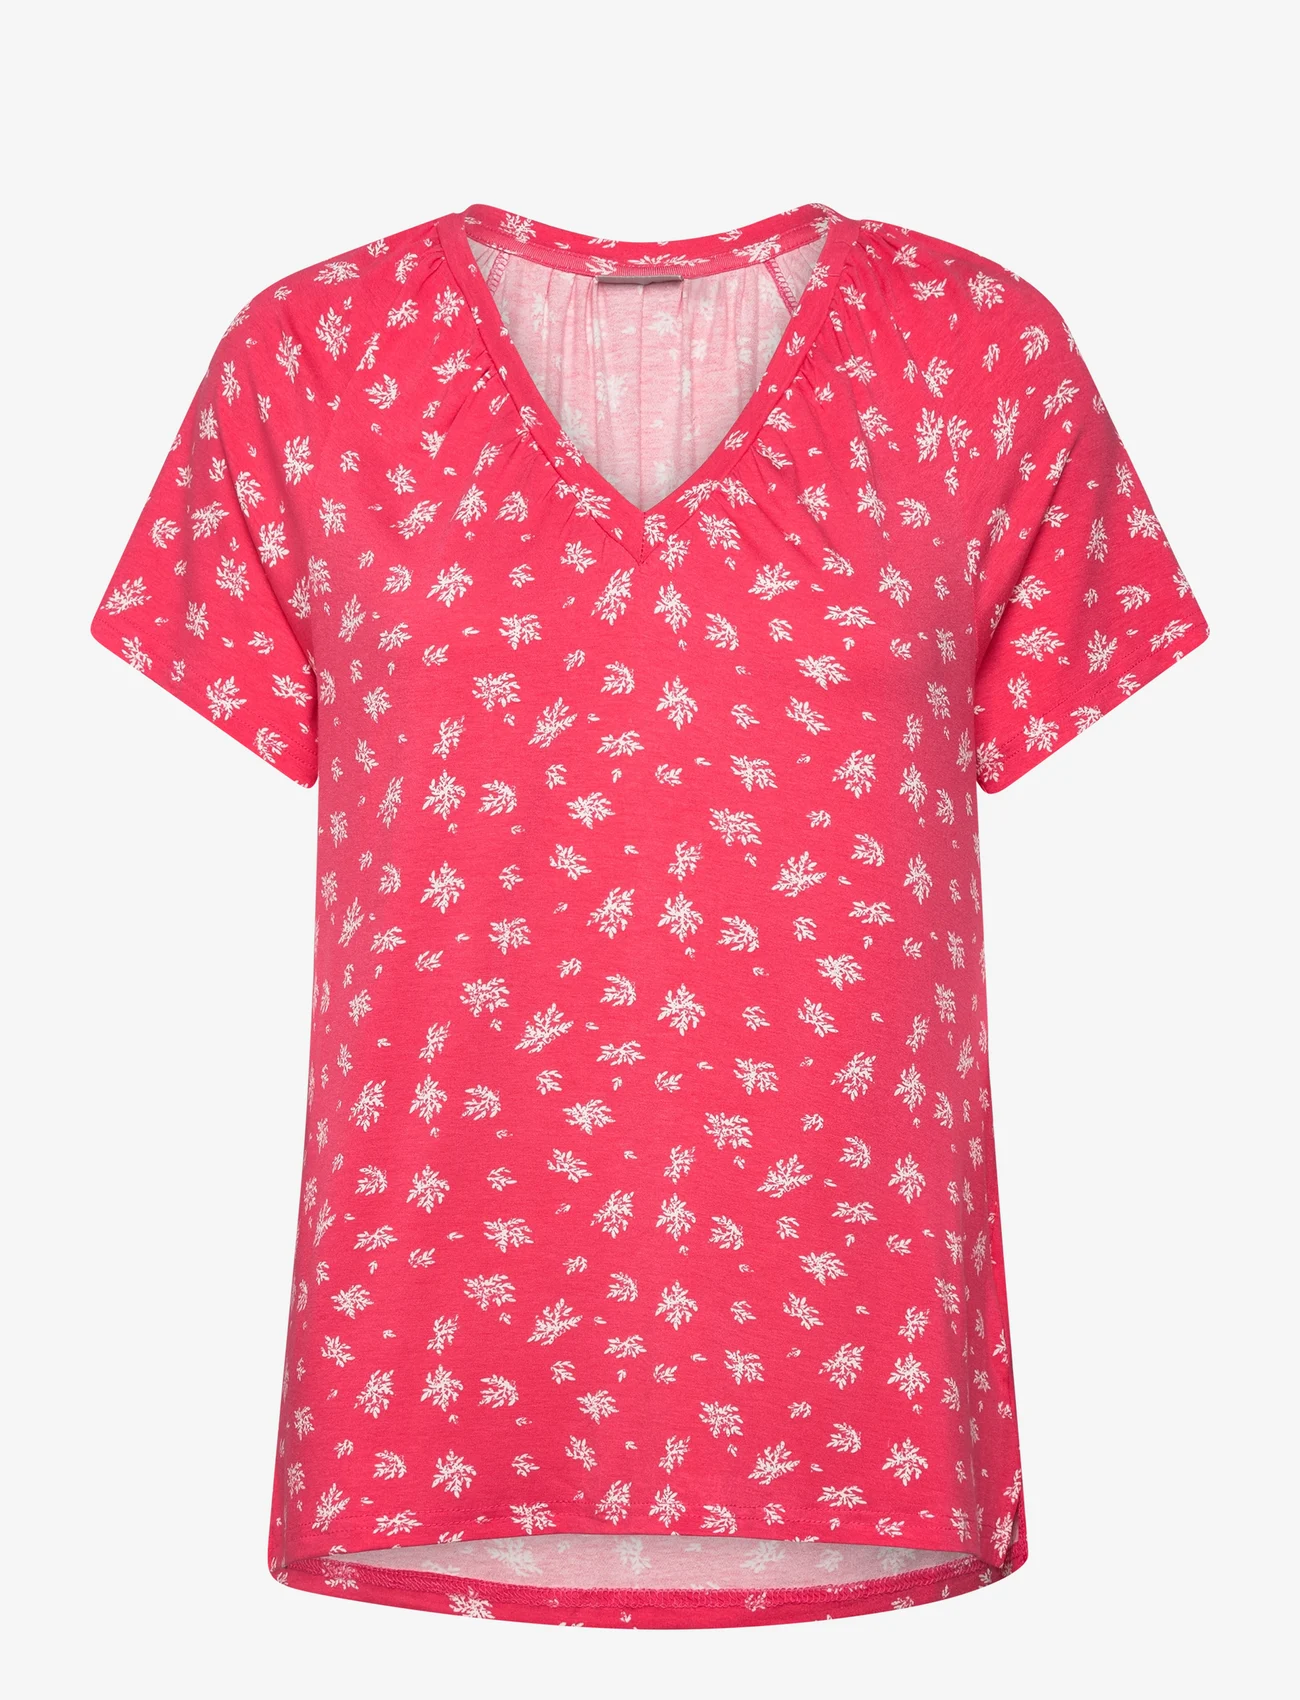 Fransa - FRSANIE TEE 1 - lowest prices - rouge red - 0